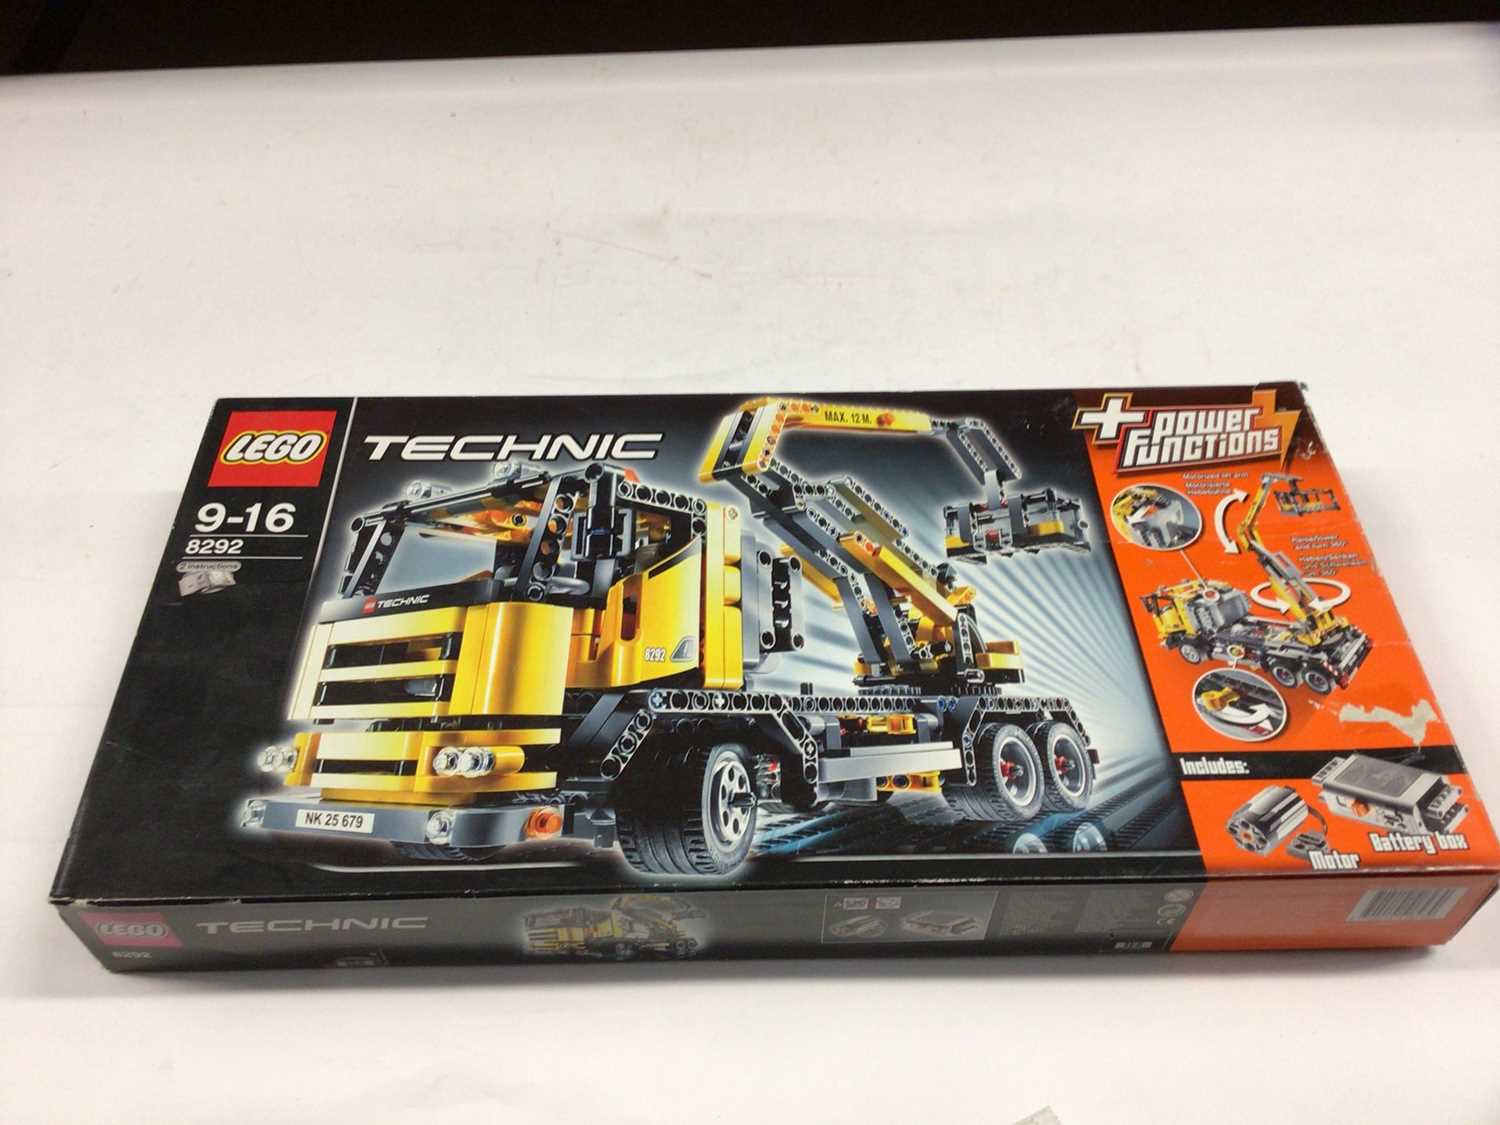 Lego Technic 8295 Telescopic Loader, 42006 Excavator 2 in 1, 8446 Monster Crane Truck, all with inst - Image 7 of 8